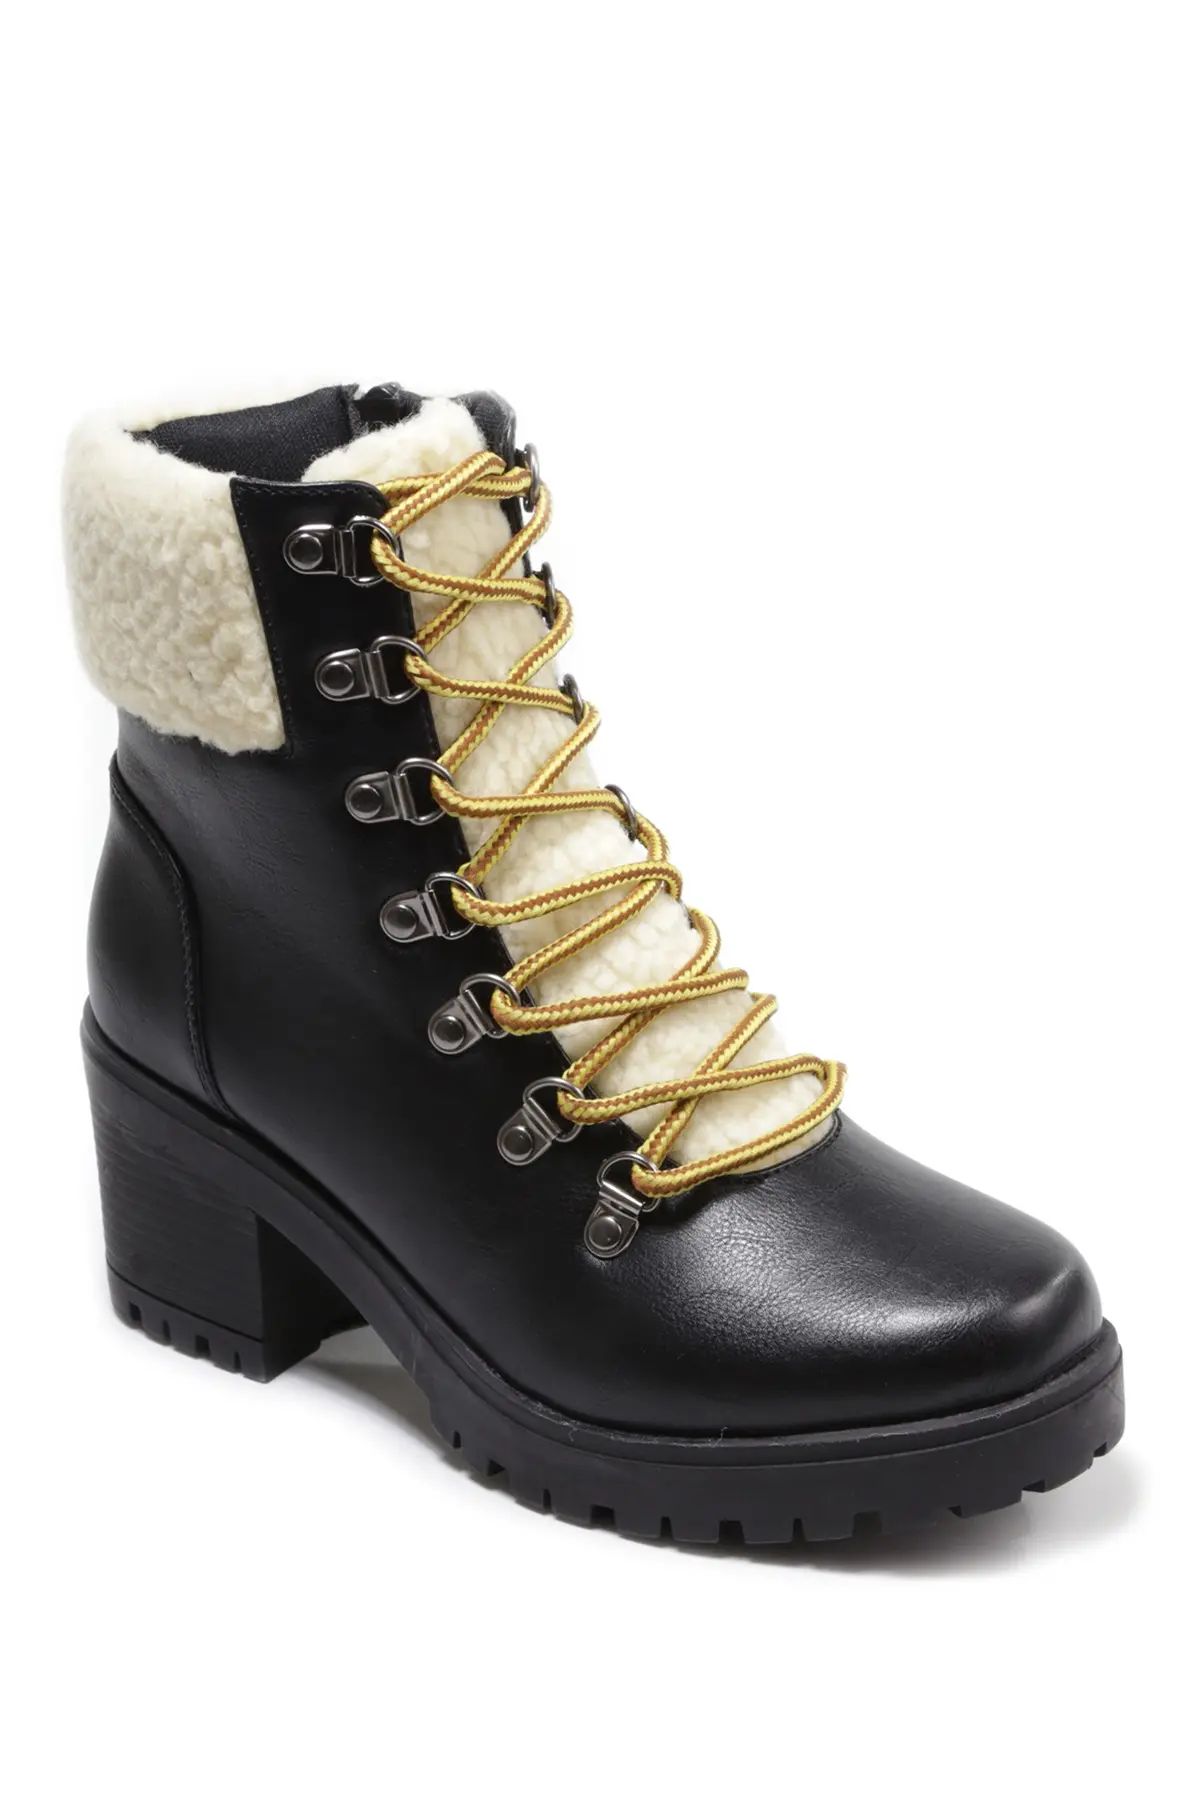 Catherine Catherine Malandrino Polar Faux Shearling Lined Chunky Heel Bootie at Nordstrom Rack | Nordstrom Rack